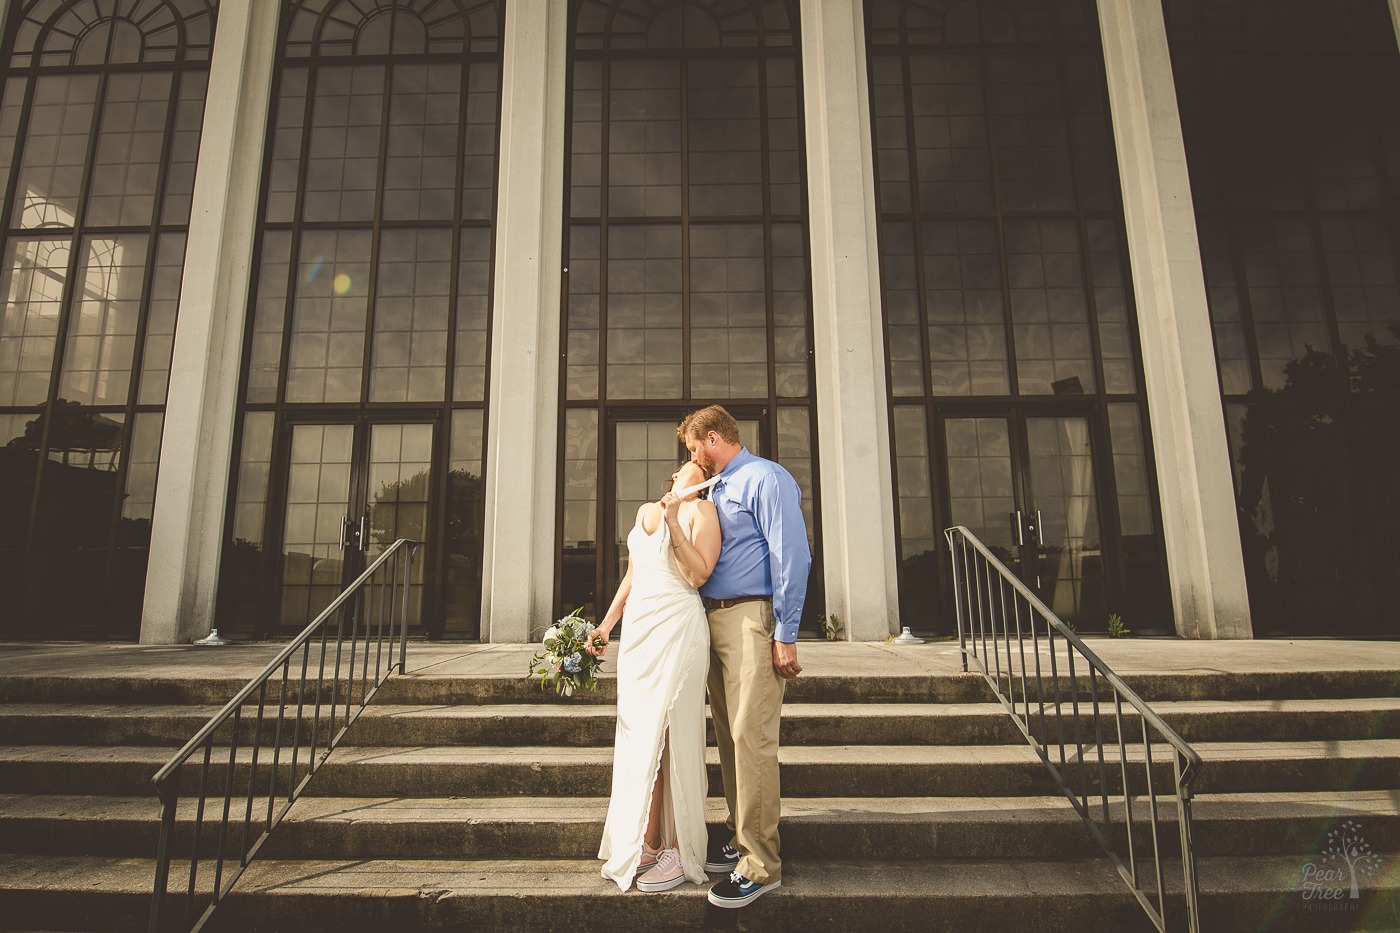 Bride holding grooms tie while she kisses him on steps in front of building with tall windows